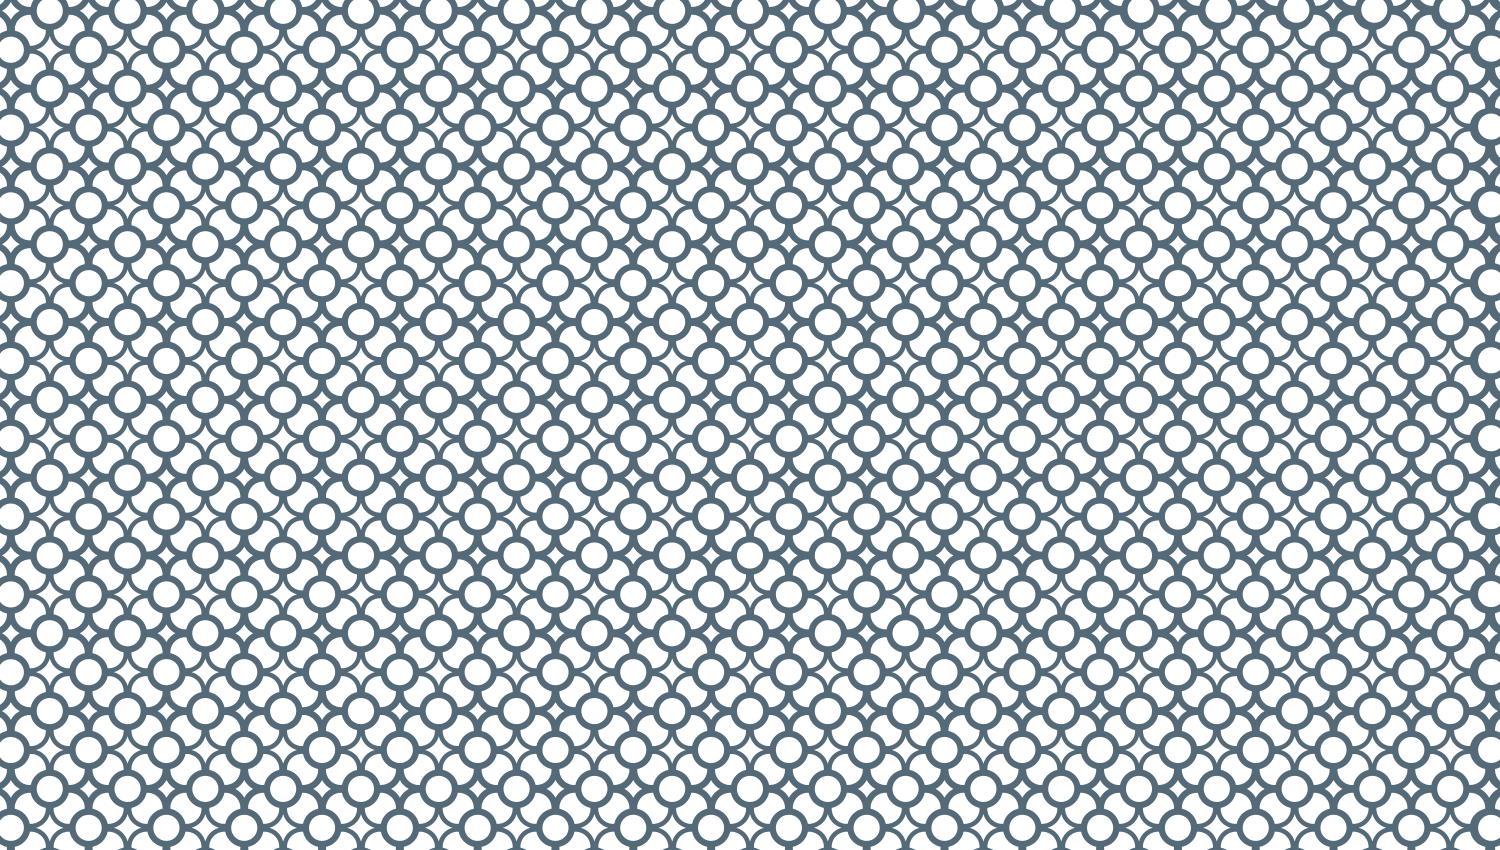 Parasoleil™ Pulsar© pattern displayed with a blue color overlay